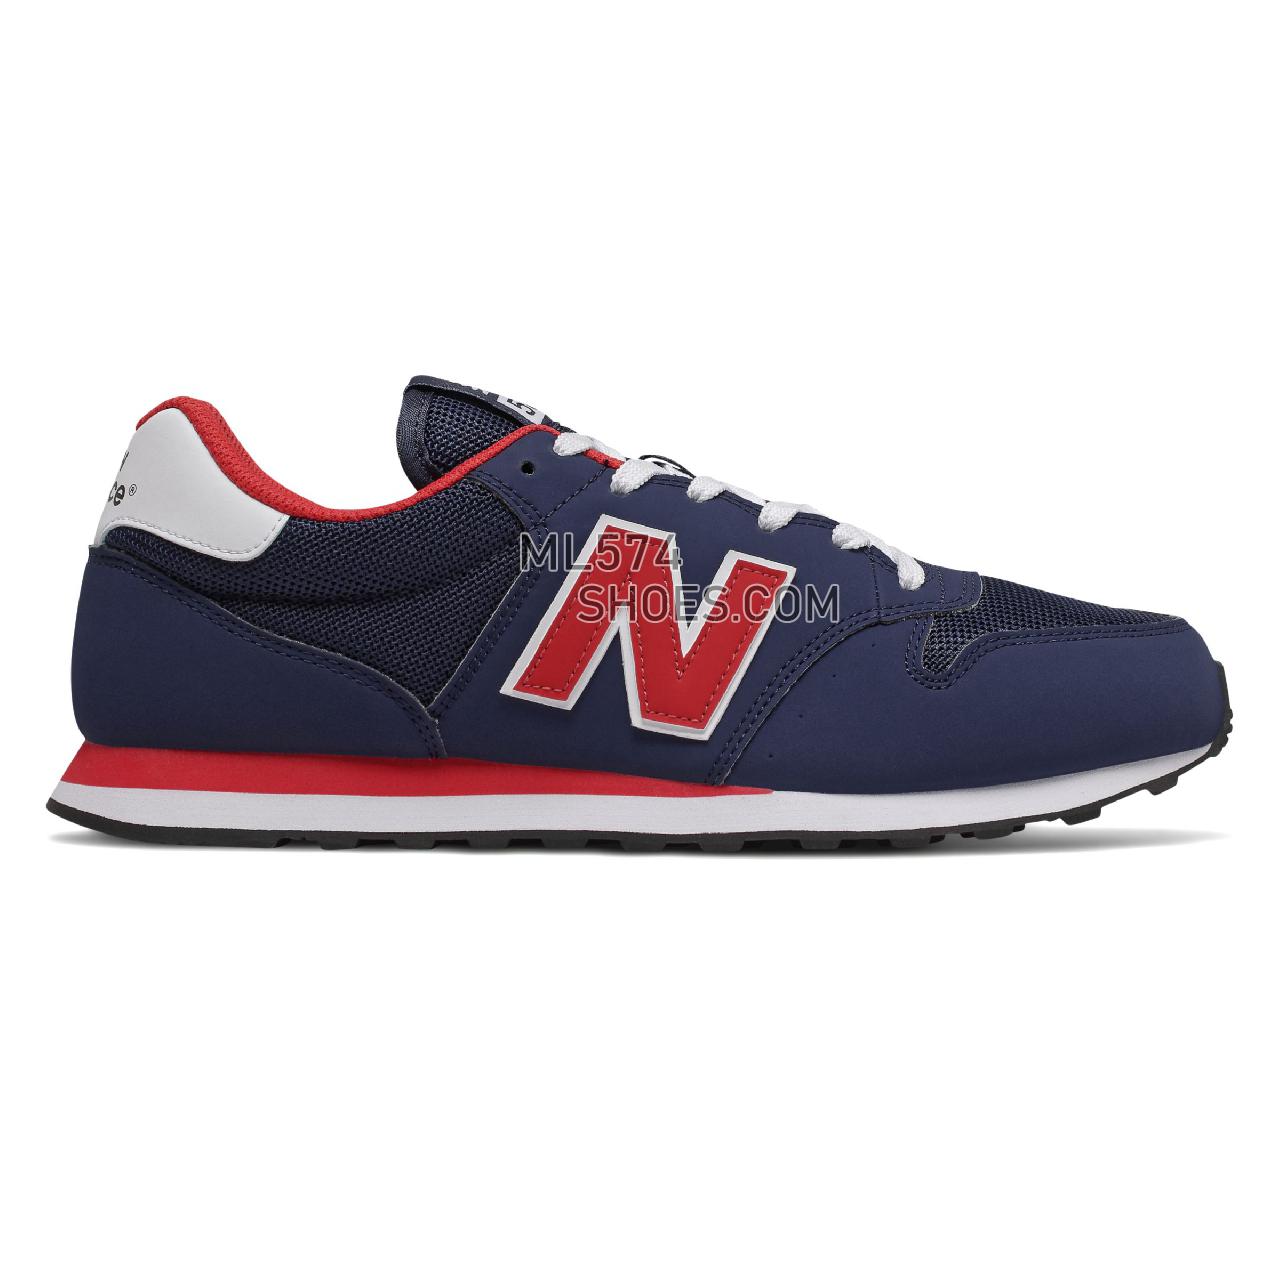 New Balance 500 Classic - Men's Classic Sneakers - Team Navy with Team Red - GM500TRT